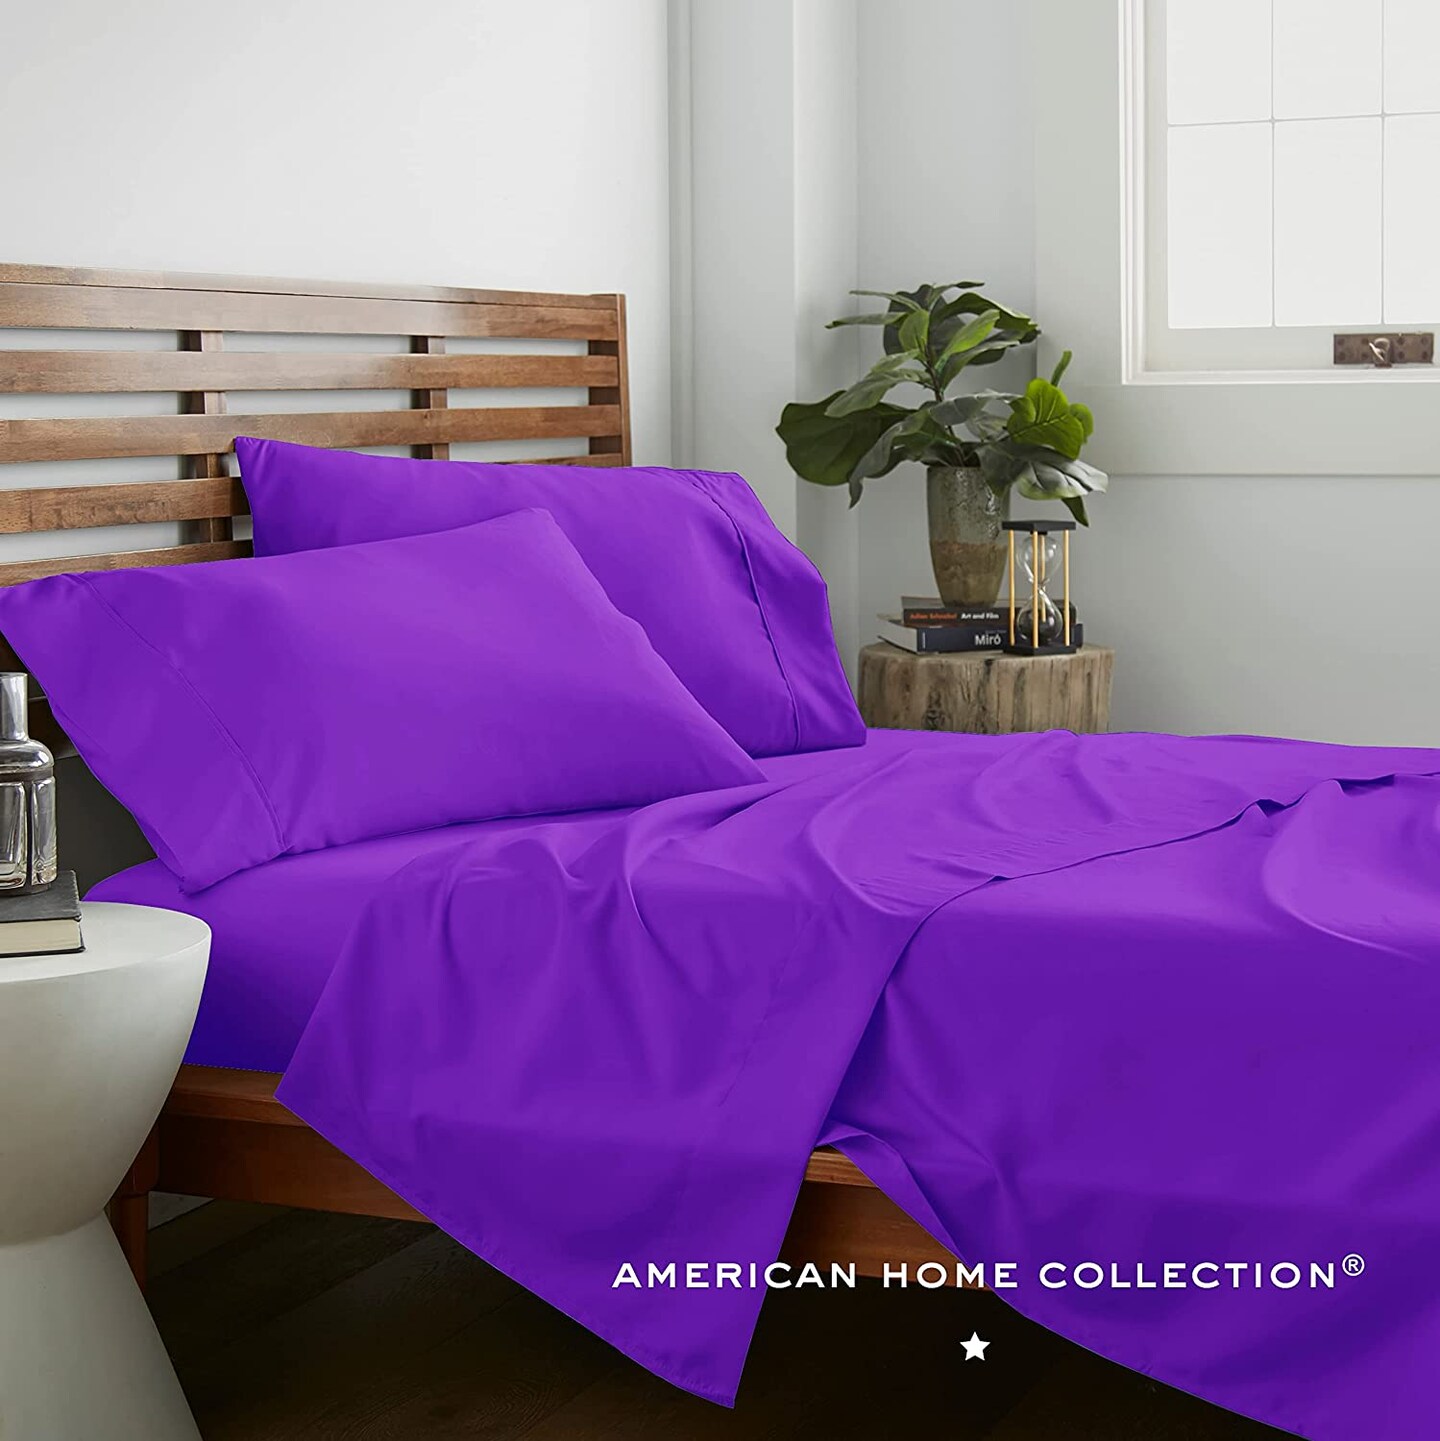 American Home Collection Ultra Soft 4 Piece Microfiber Bedding Sheets and Pillowcase Set Lightweight and Wrinkle Free